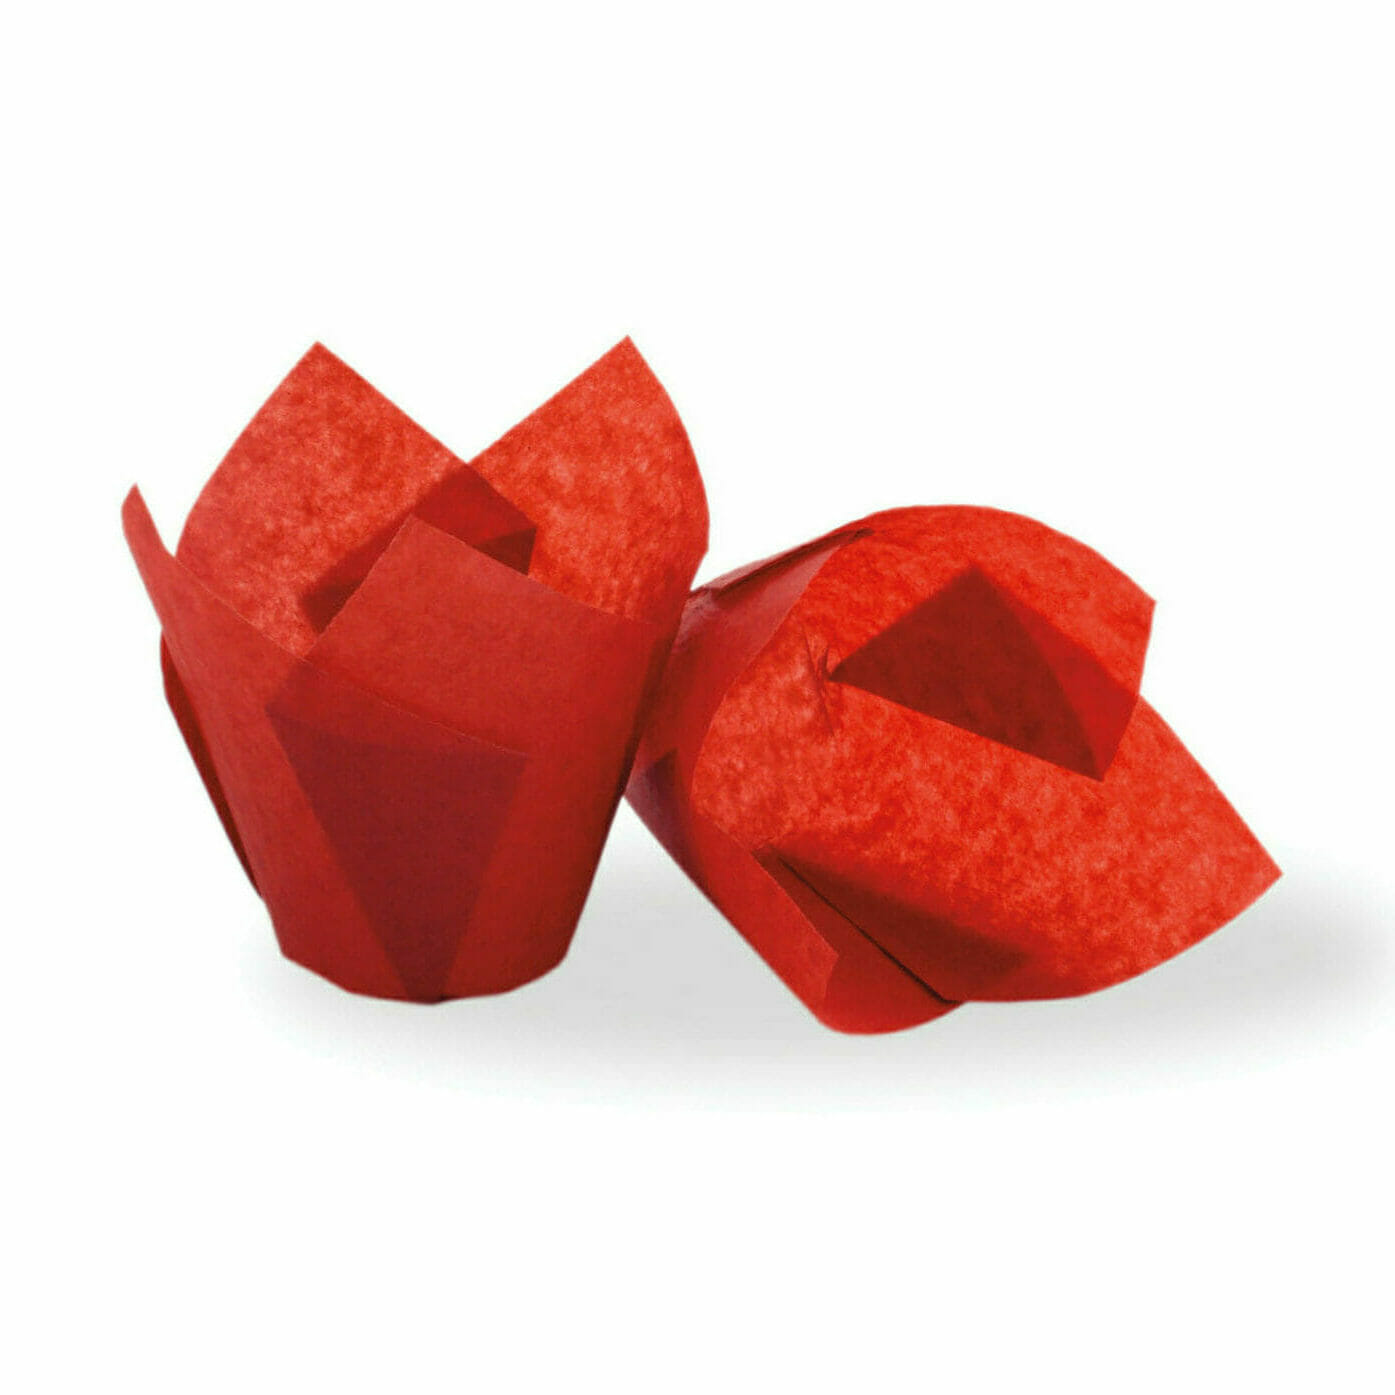 4" x 4" Food-Safe Tulip Inserts, Red, 1000 pieces./cs.